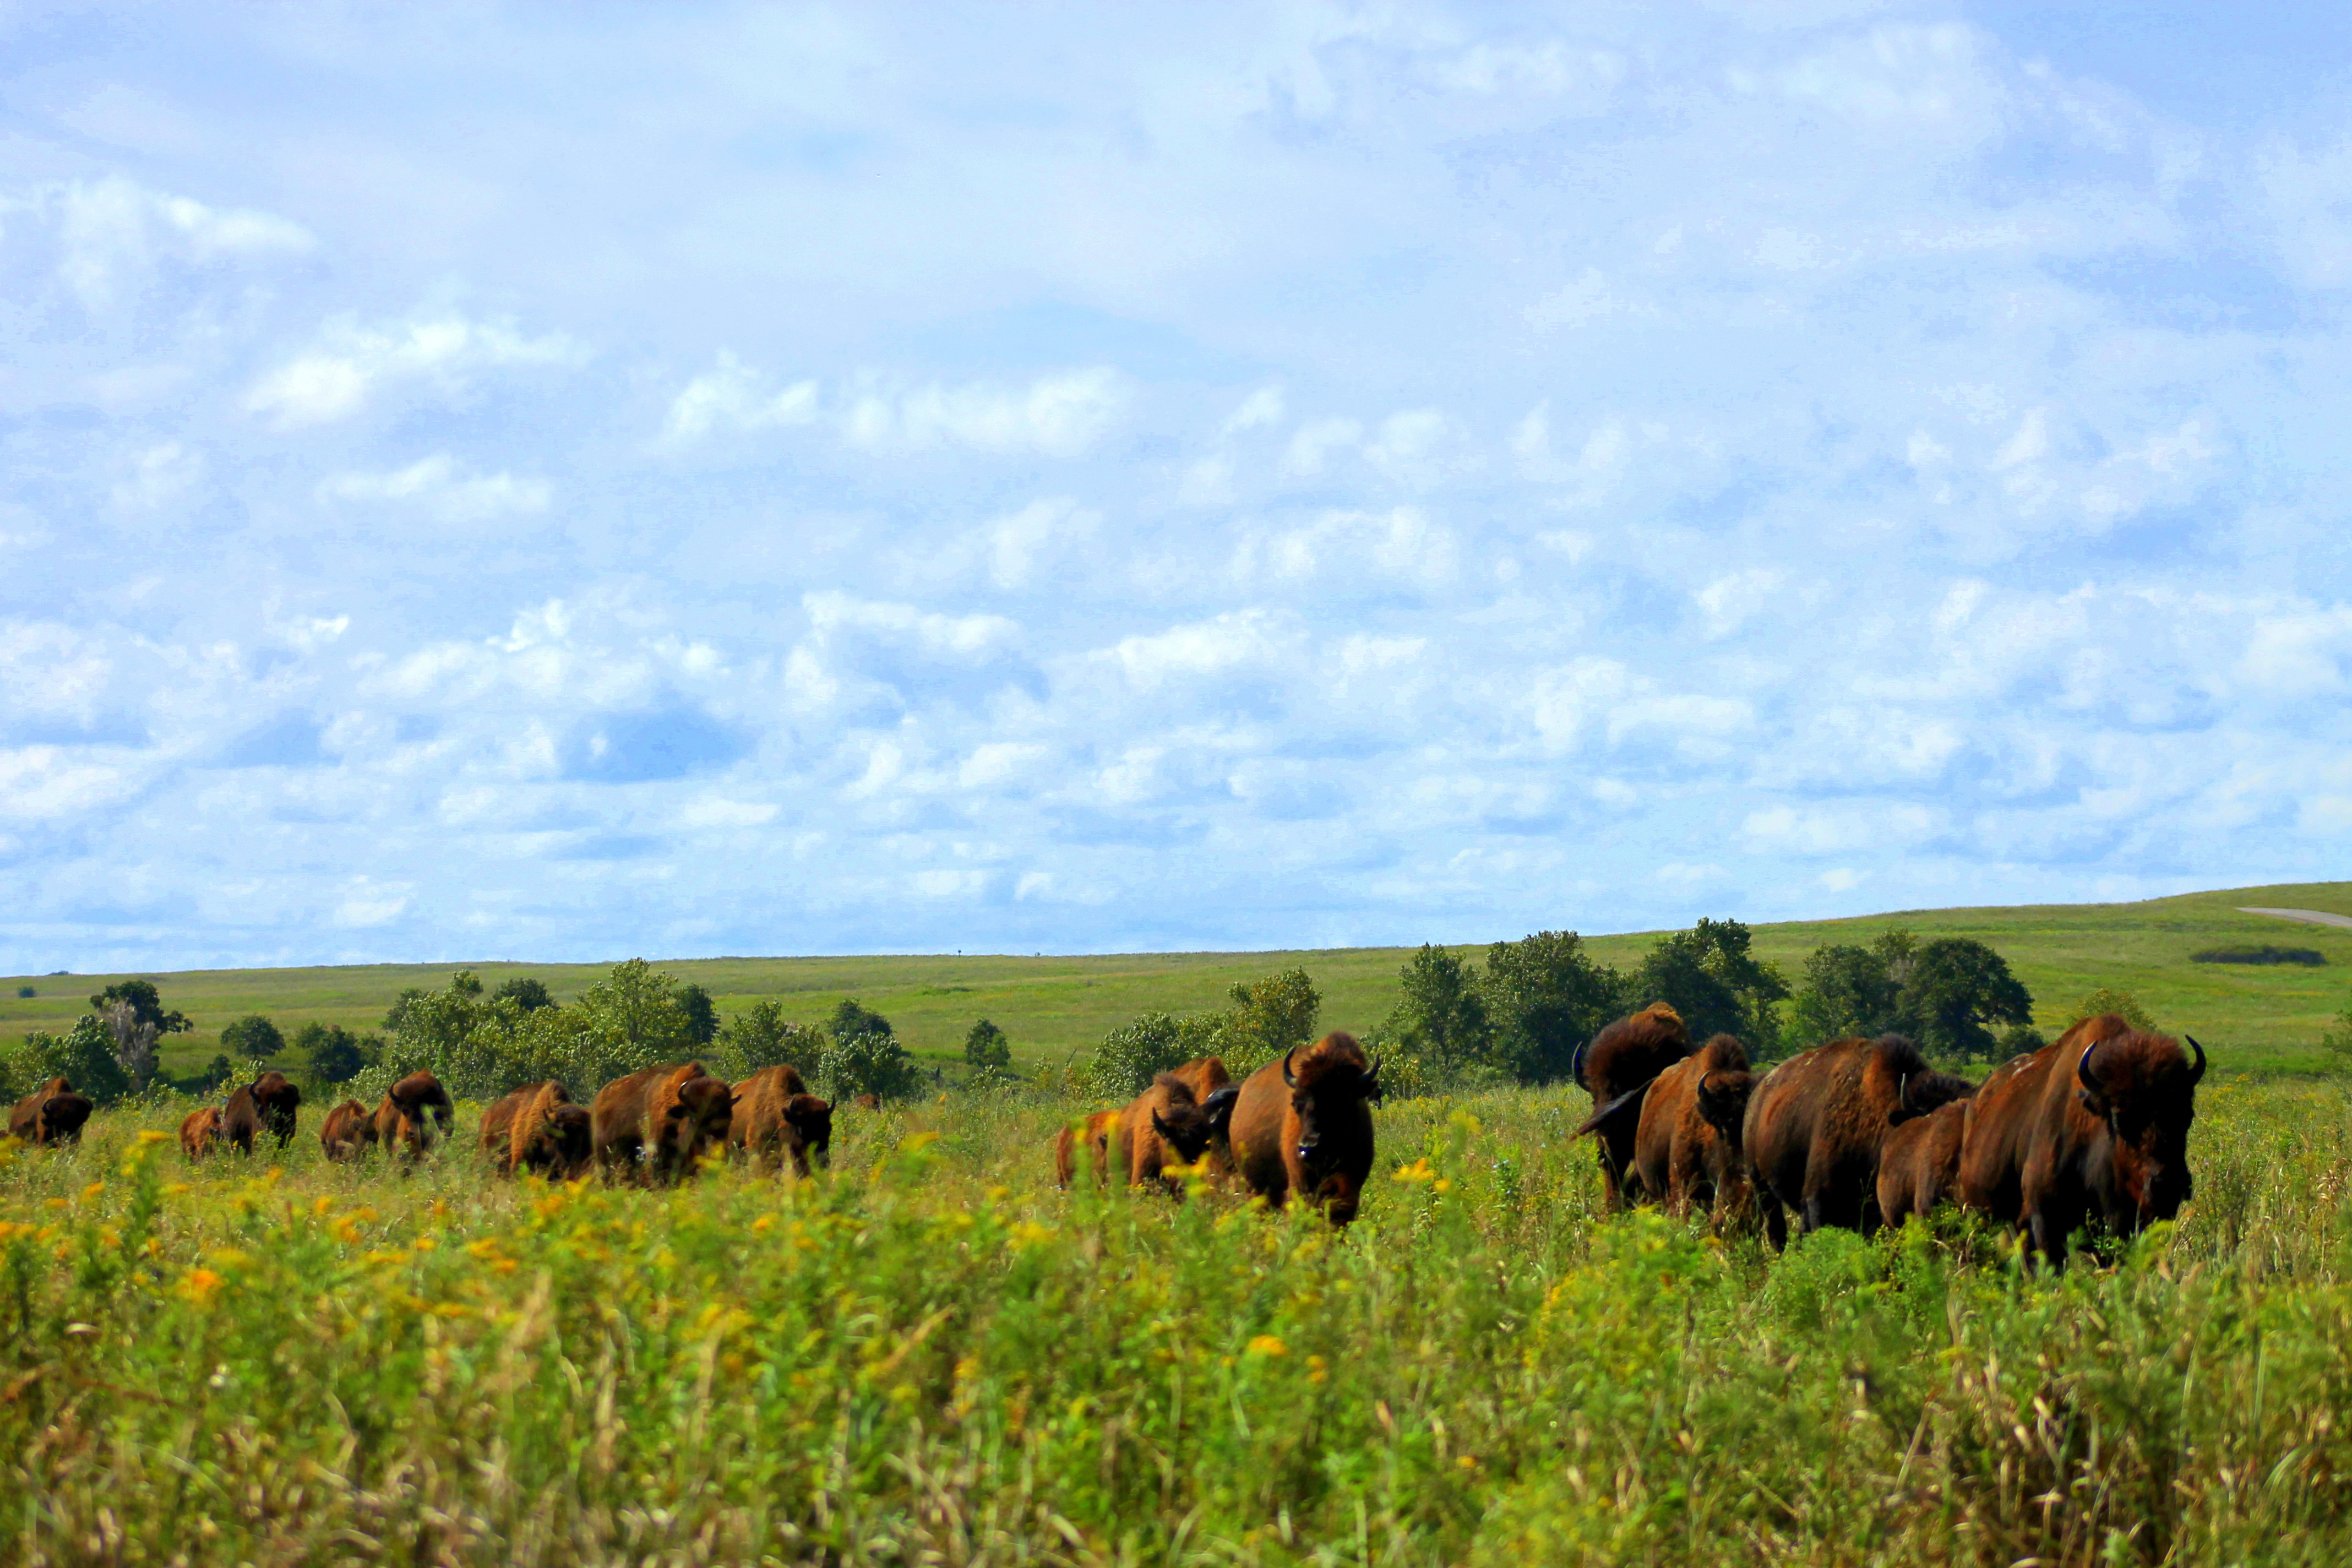 A Small Part of the 2,500-head bison herd which roams freely over the Joseph H. Williams Prairie Preserve. Photo by Carmon Briggs